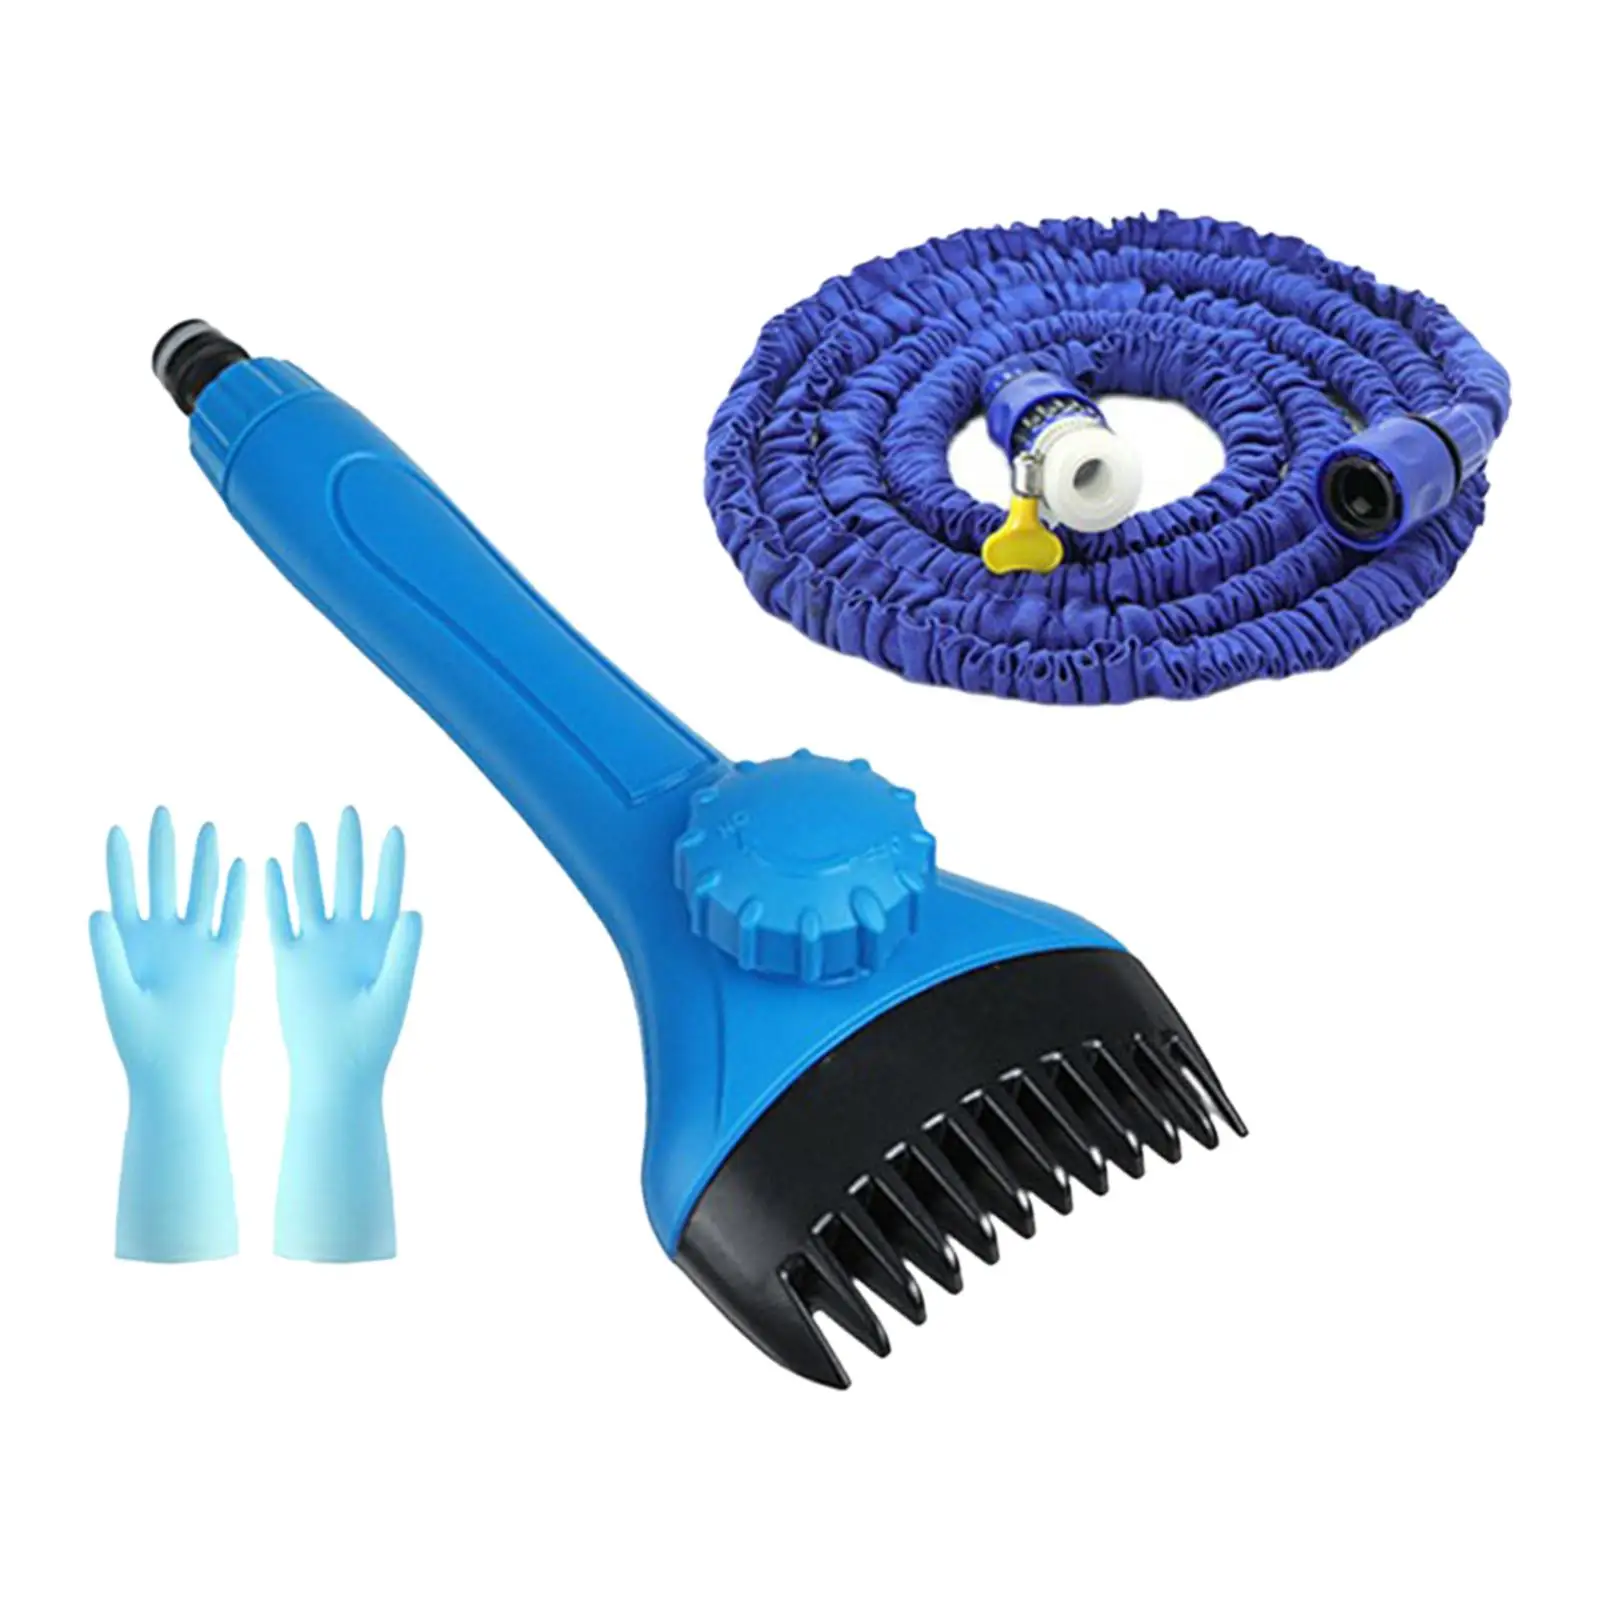 Heavy Duty Pool & Cleaner with Hose SPA & Hot Tub Filter